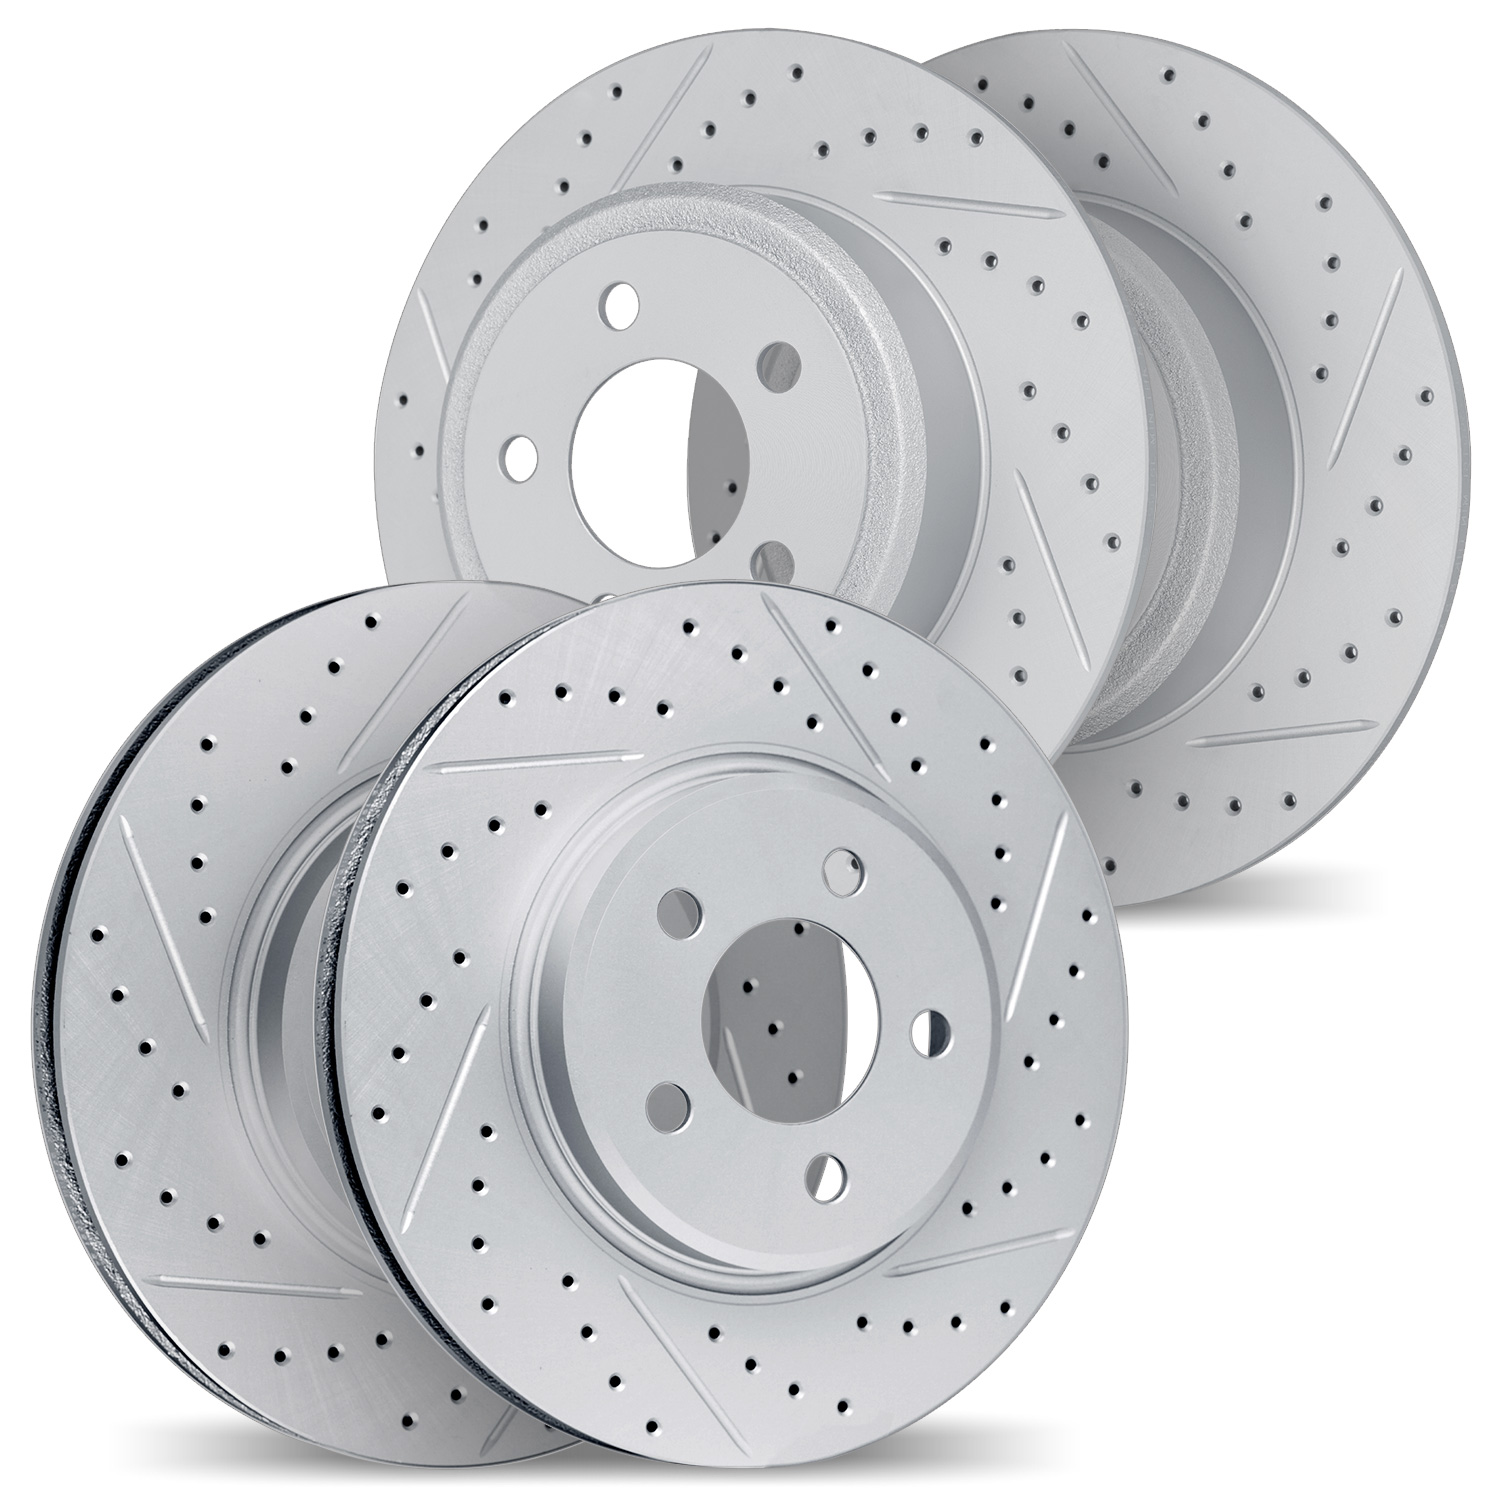 2004-03017 Geoperformance Drilled/Slotted Brake Rotors, 2009-2012 Kia/Hyundai/Genesis, Position: Front and Rear